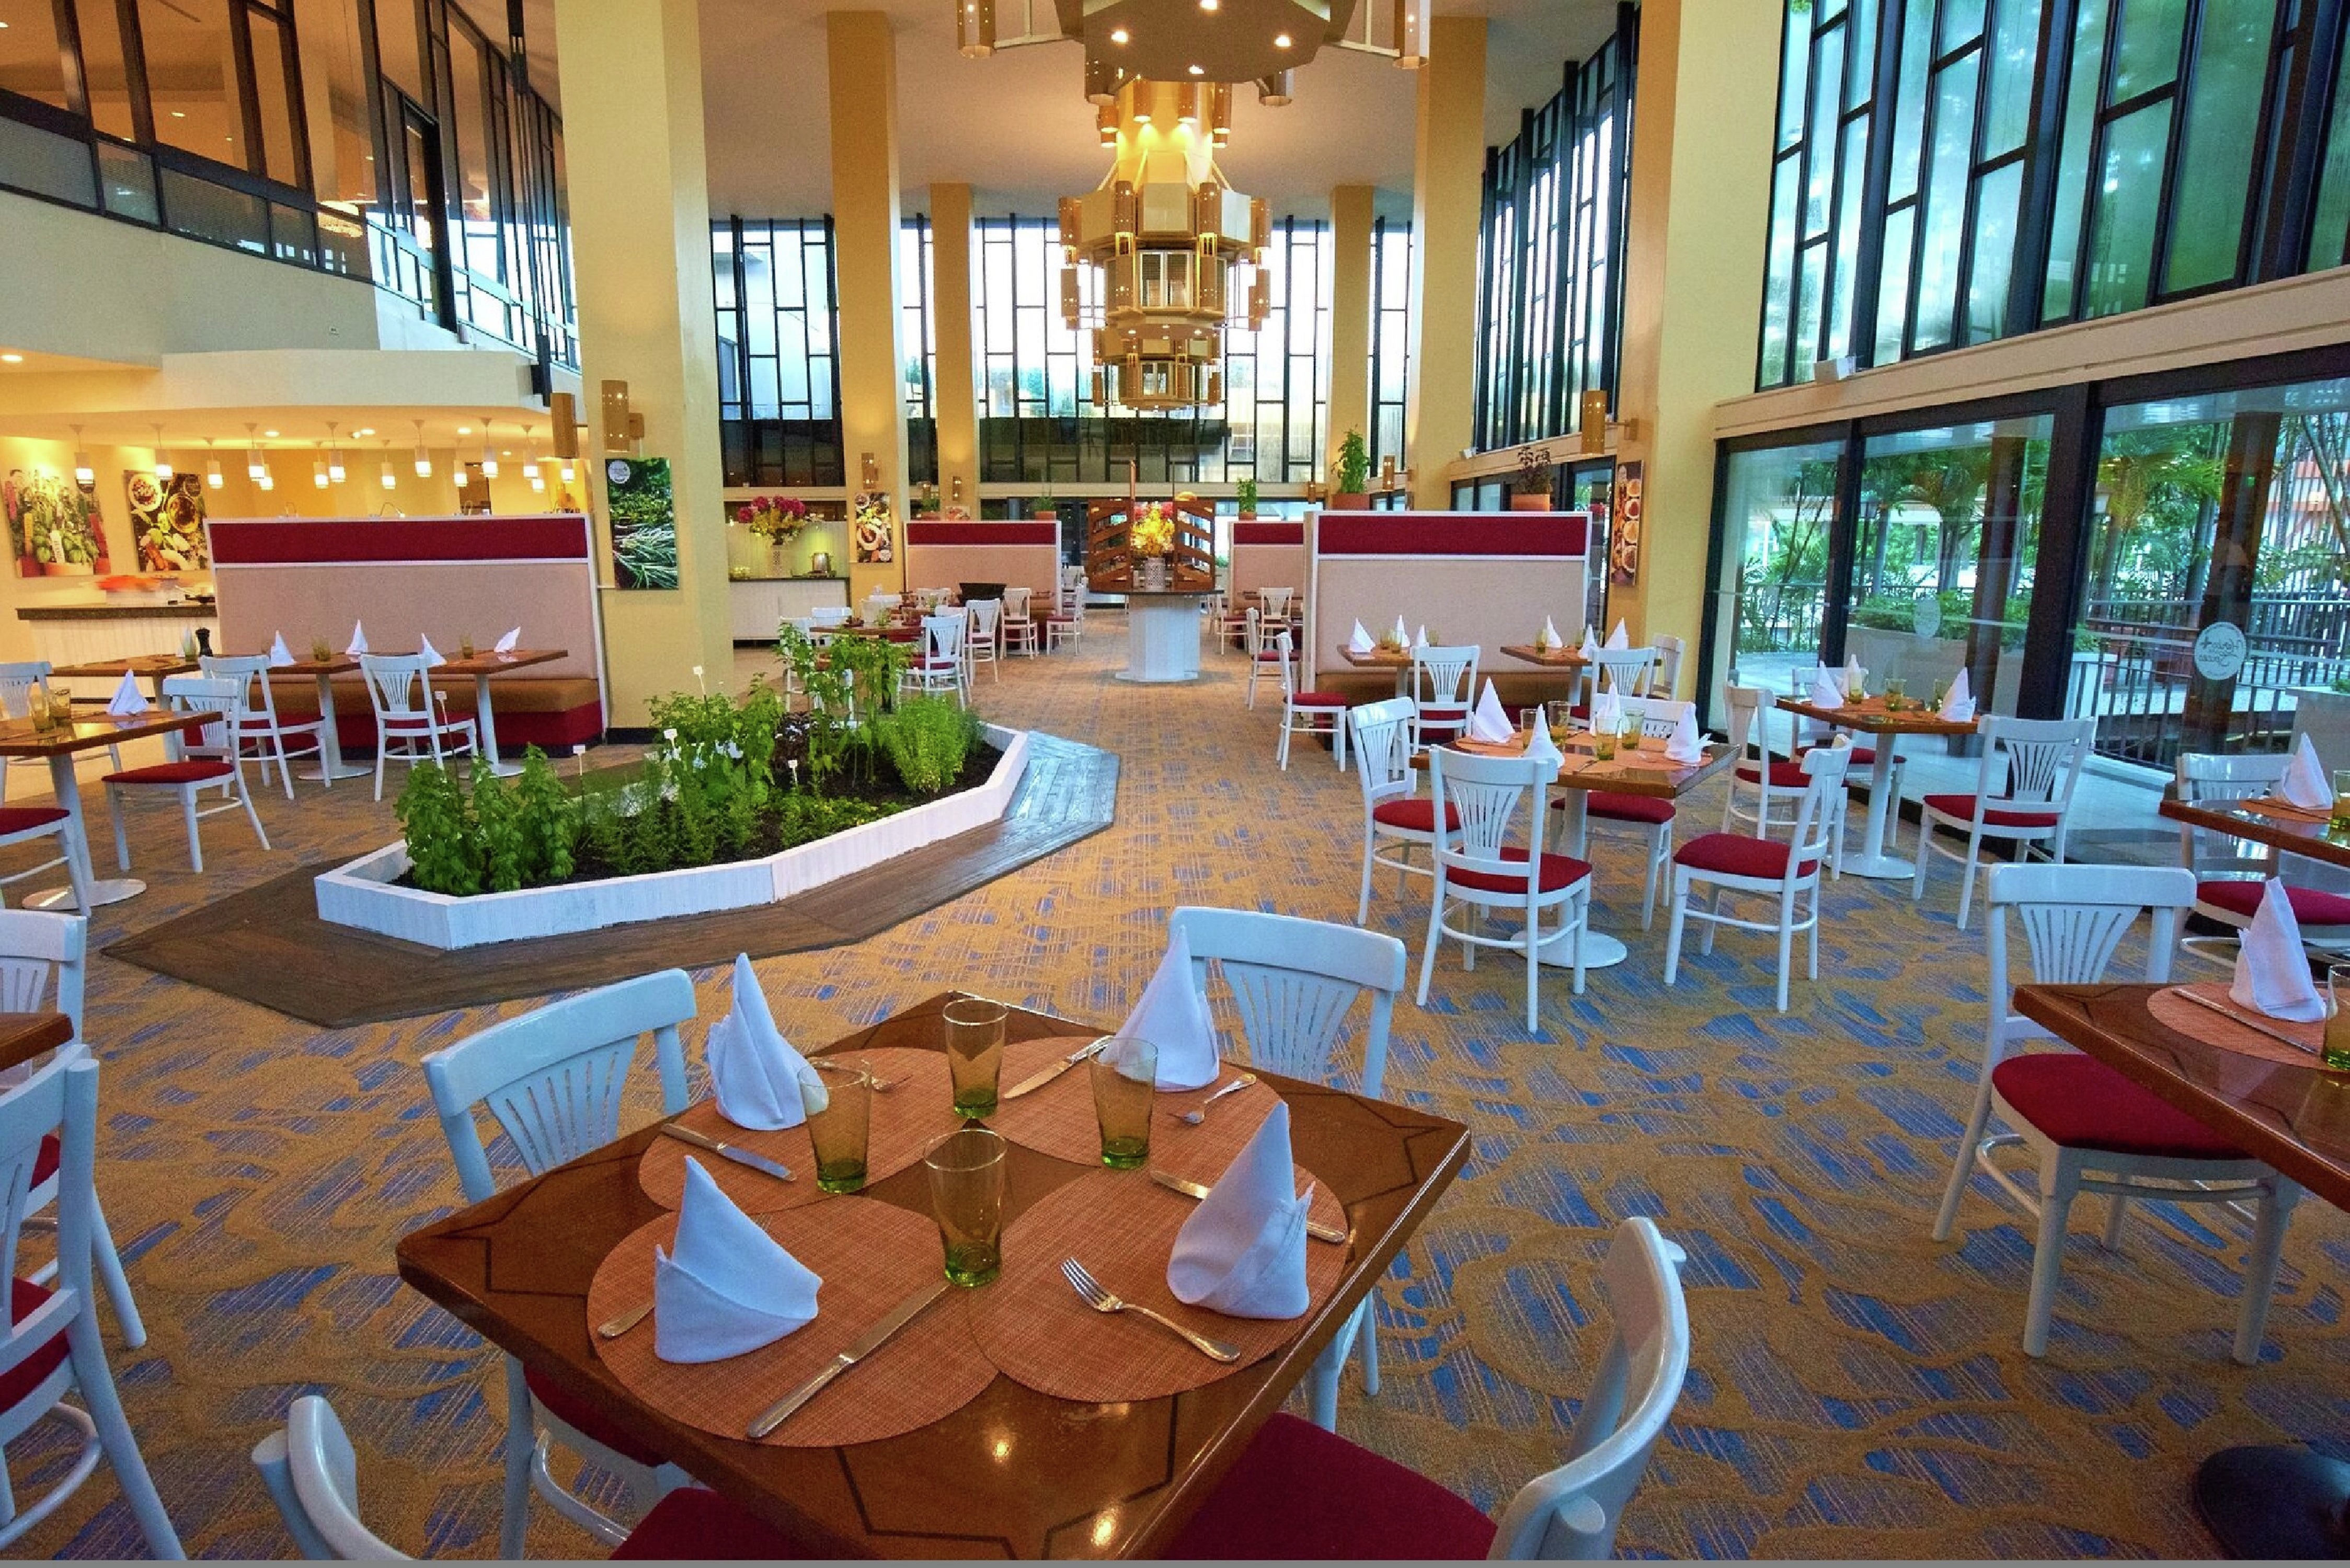 Overall View of Herb and Kitchen Restaurant Tables, Large Windows, and Herb Garden